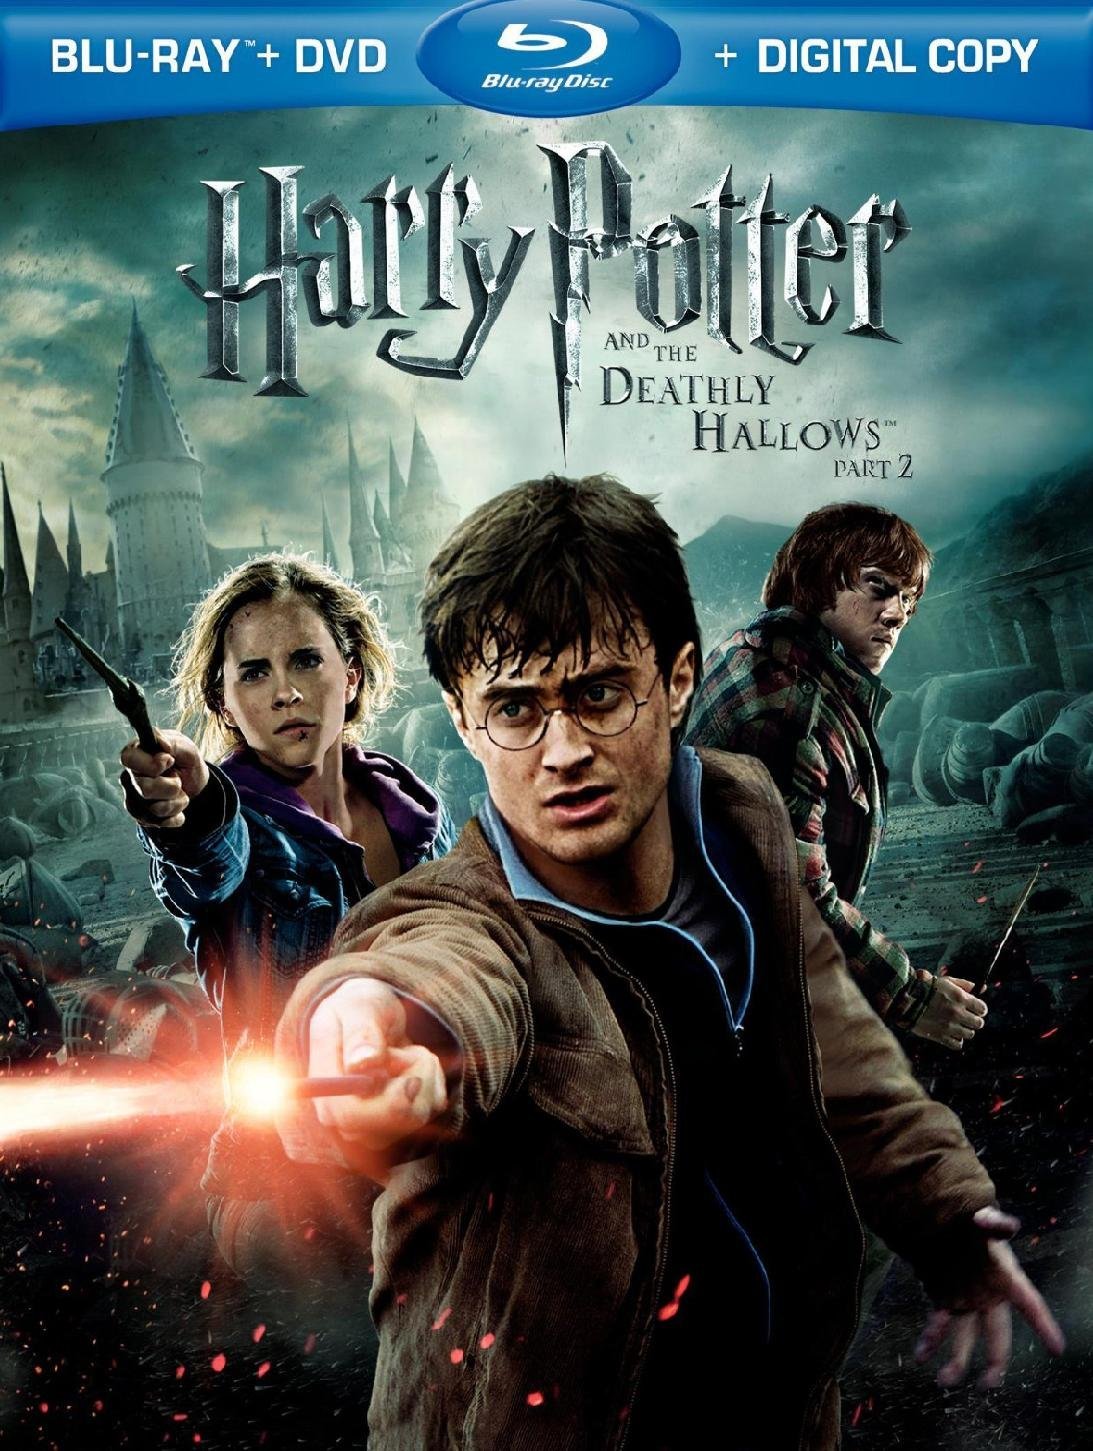 Harry Potter and the Deathly Hallows downloading